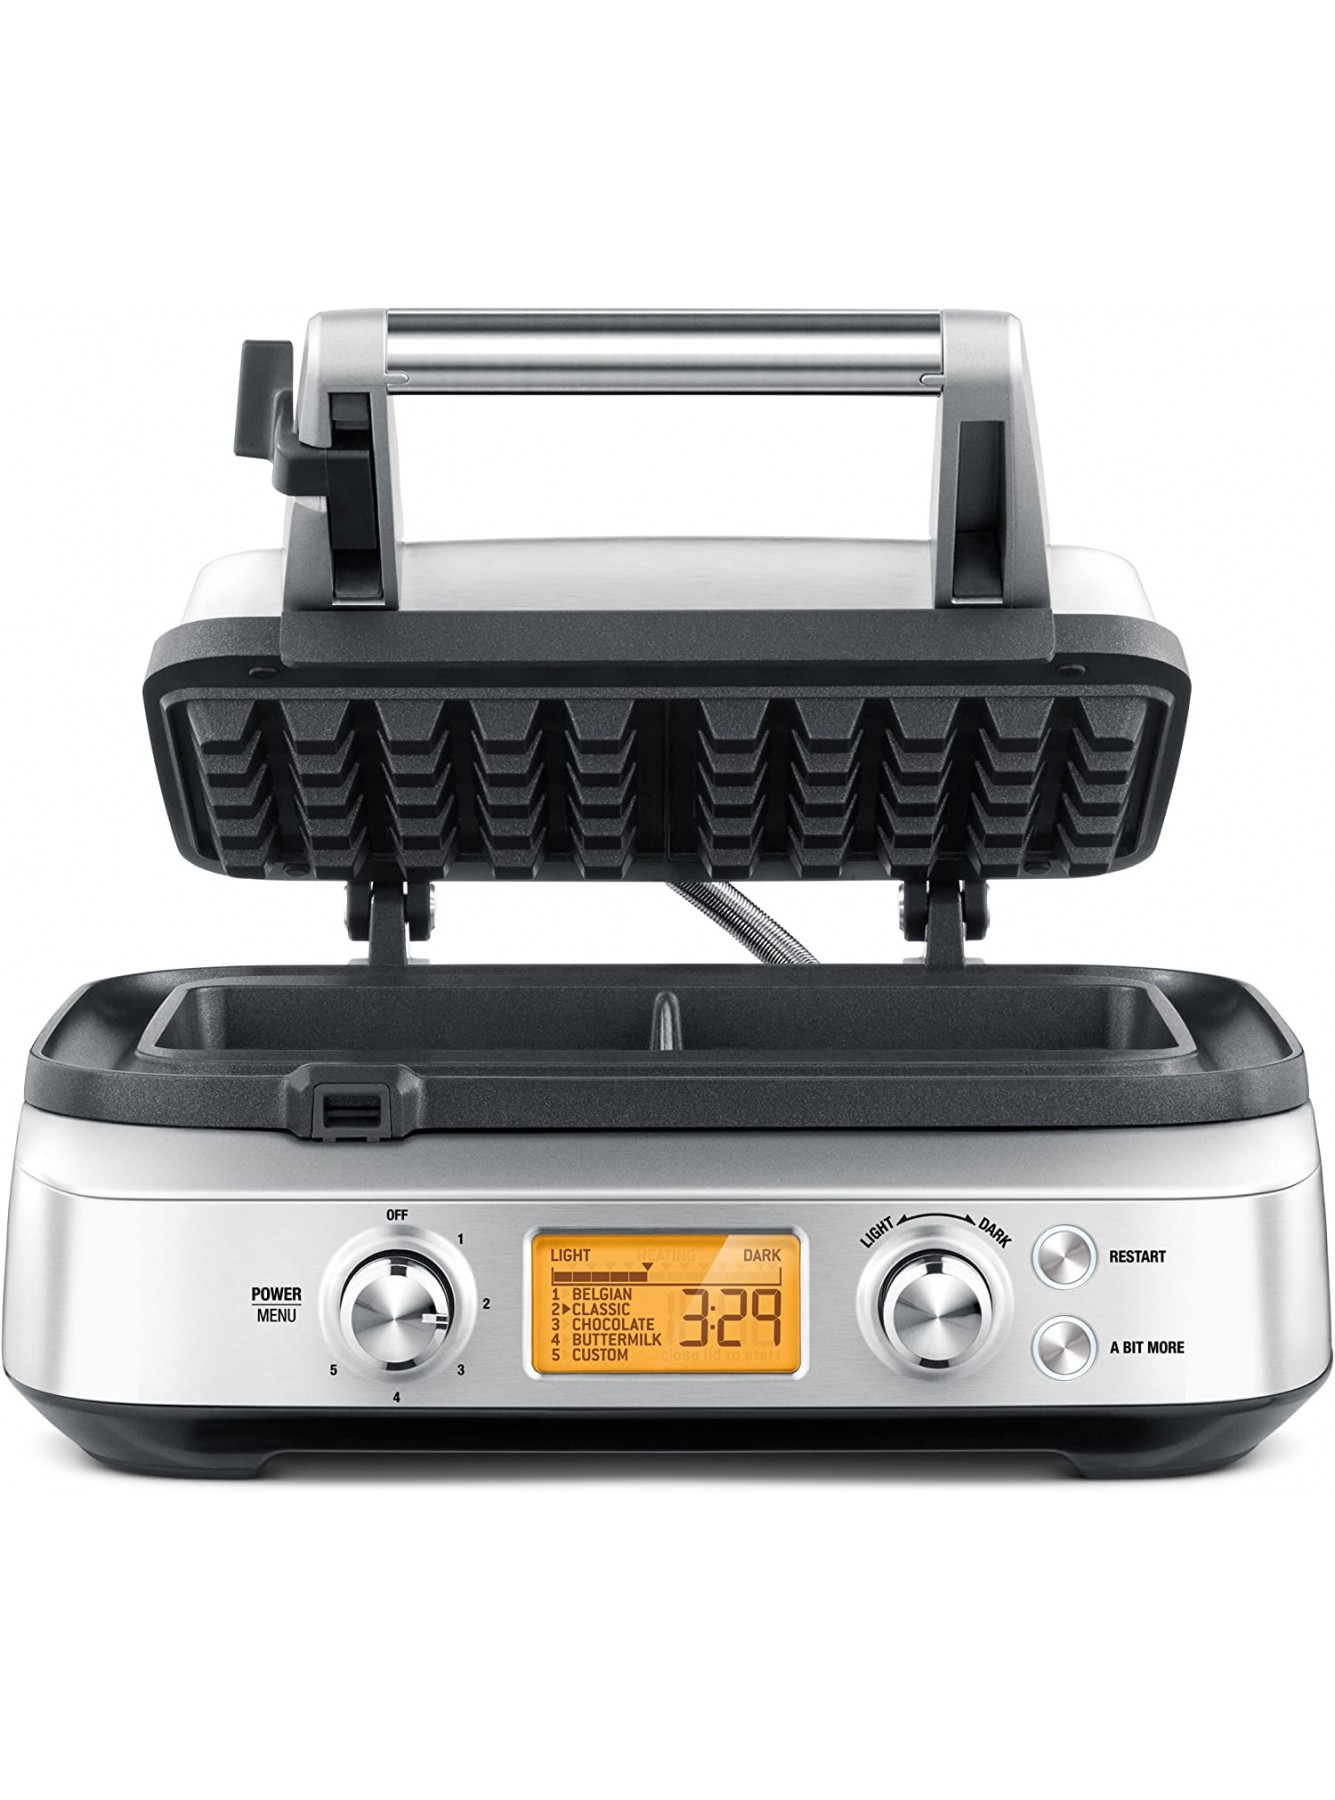 Breville BWM620XL the Smart Waffle Pro 2 Slice Waffle Maker Brushed Stainless Steel B00F5C1Q5Q